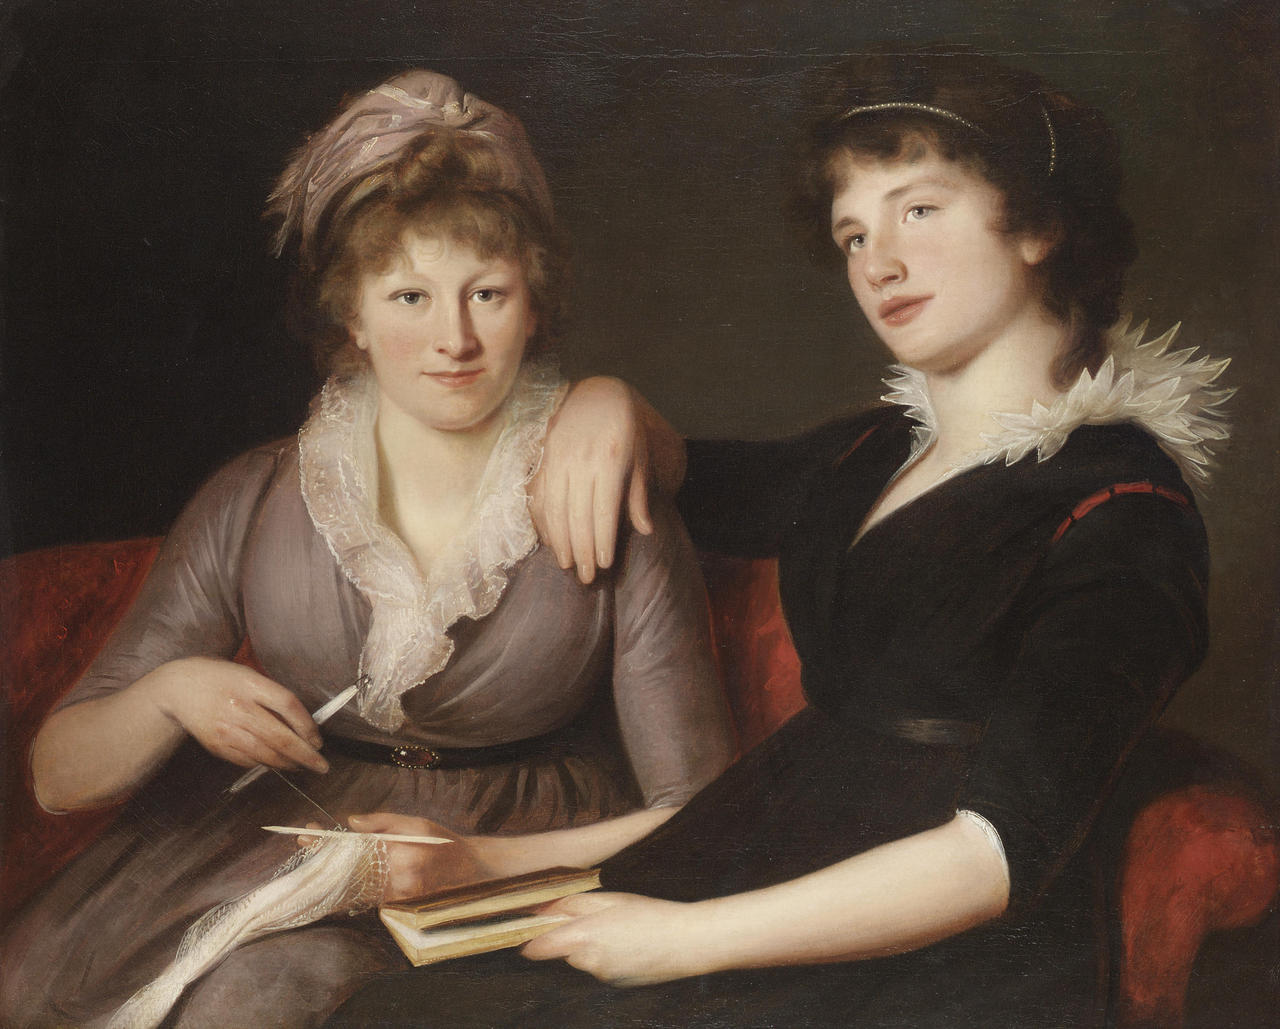 Portrait of two women, half length, seated, one in a brown dress crocheting, the other in a black dress, holding a book. Attributed to John James Masquierier (English, 1778-1855). Oil on canvas.
Masquerier returned from Paris to London, where he...